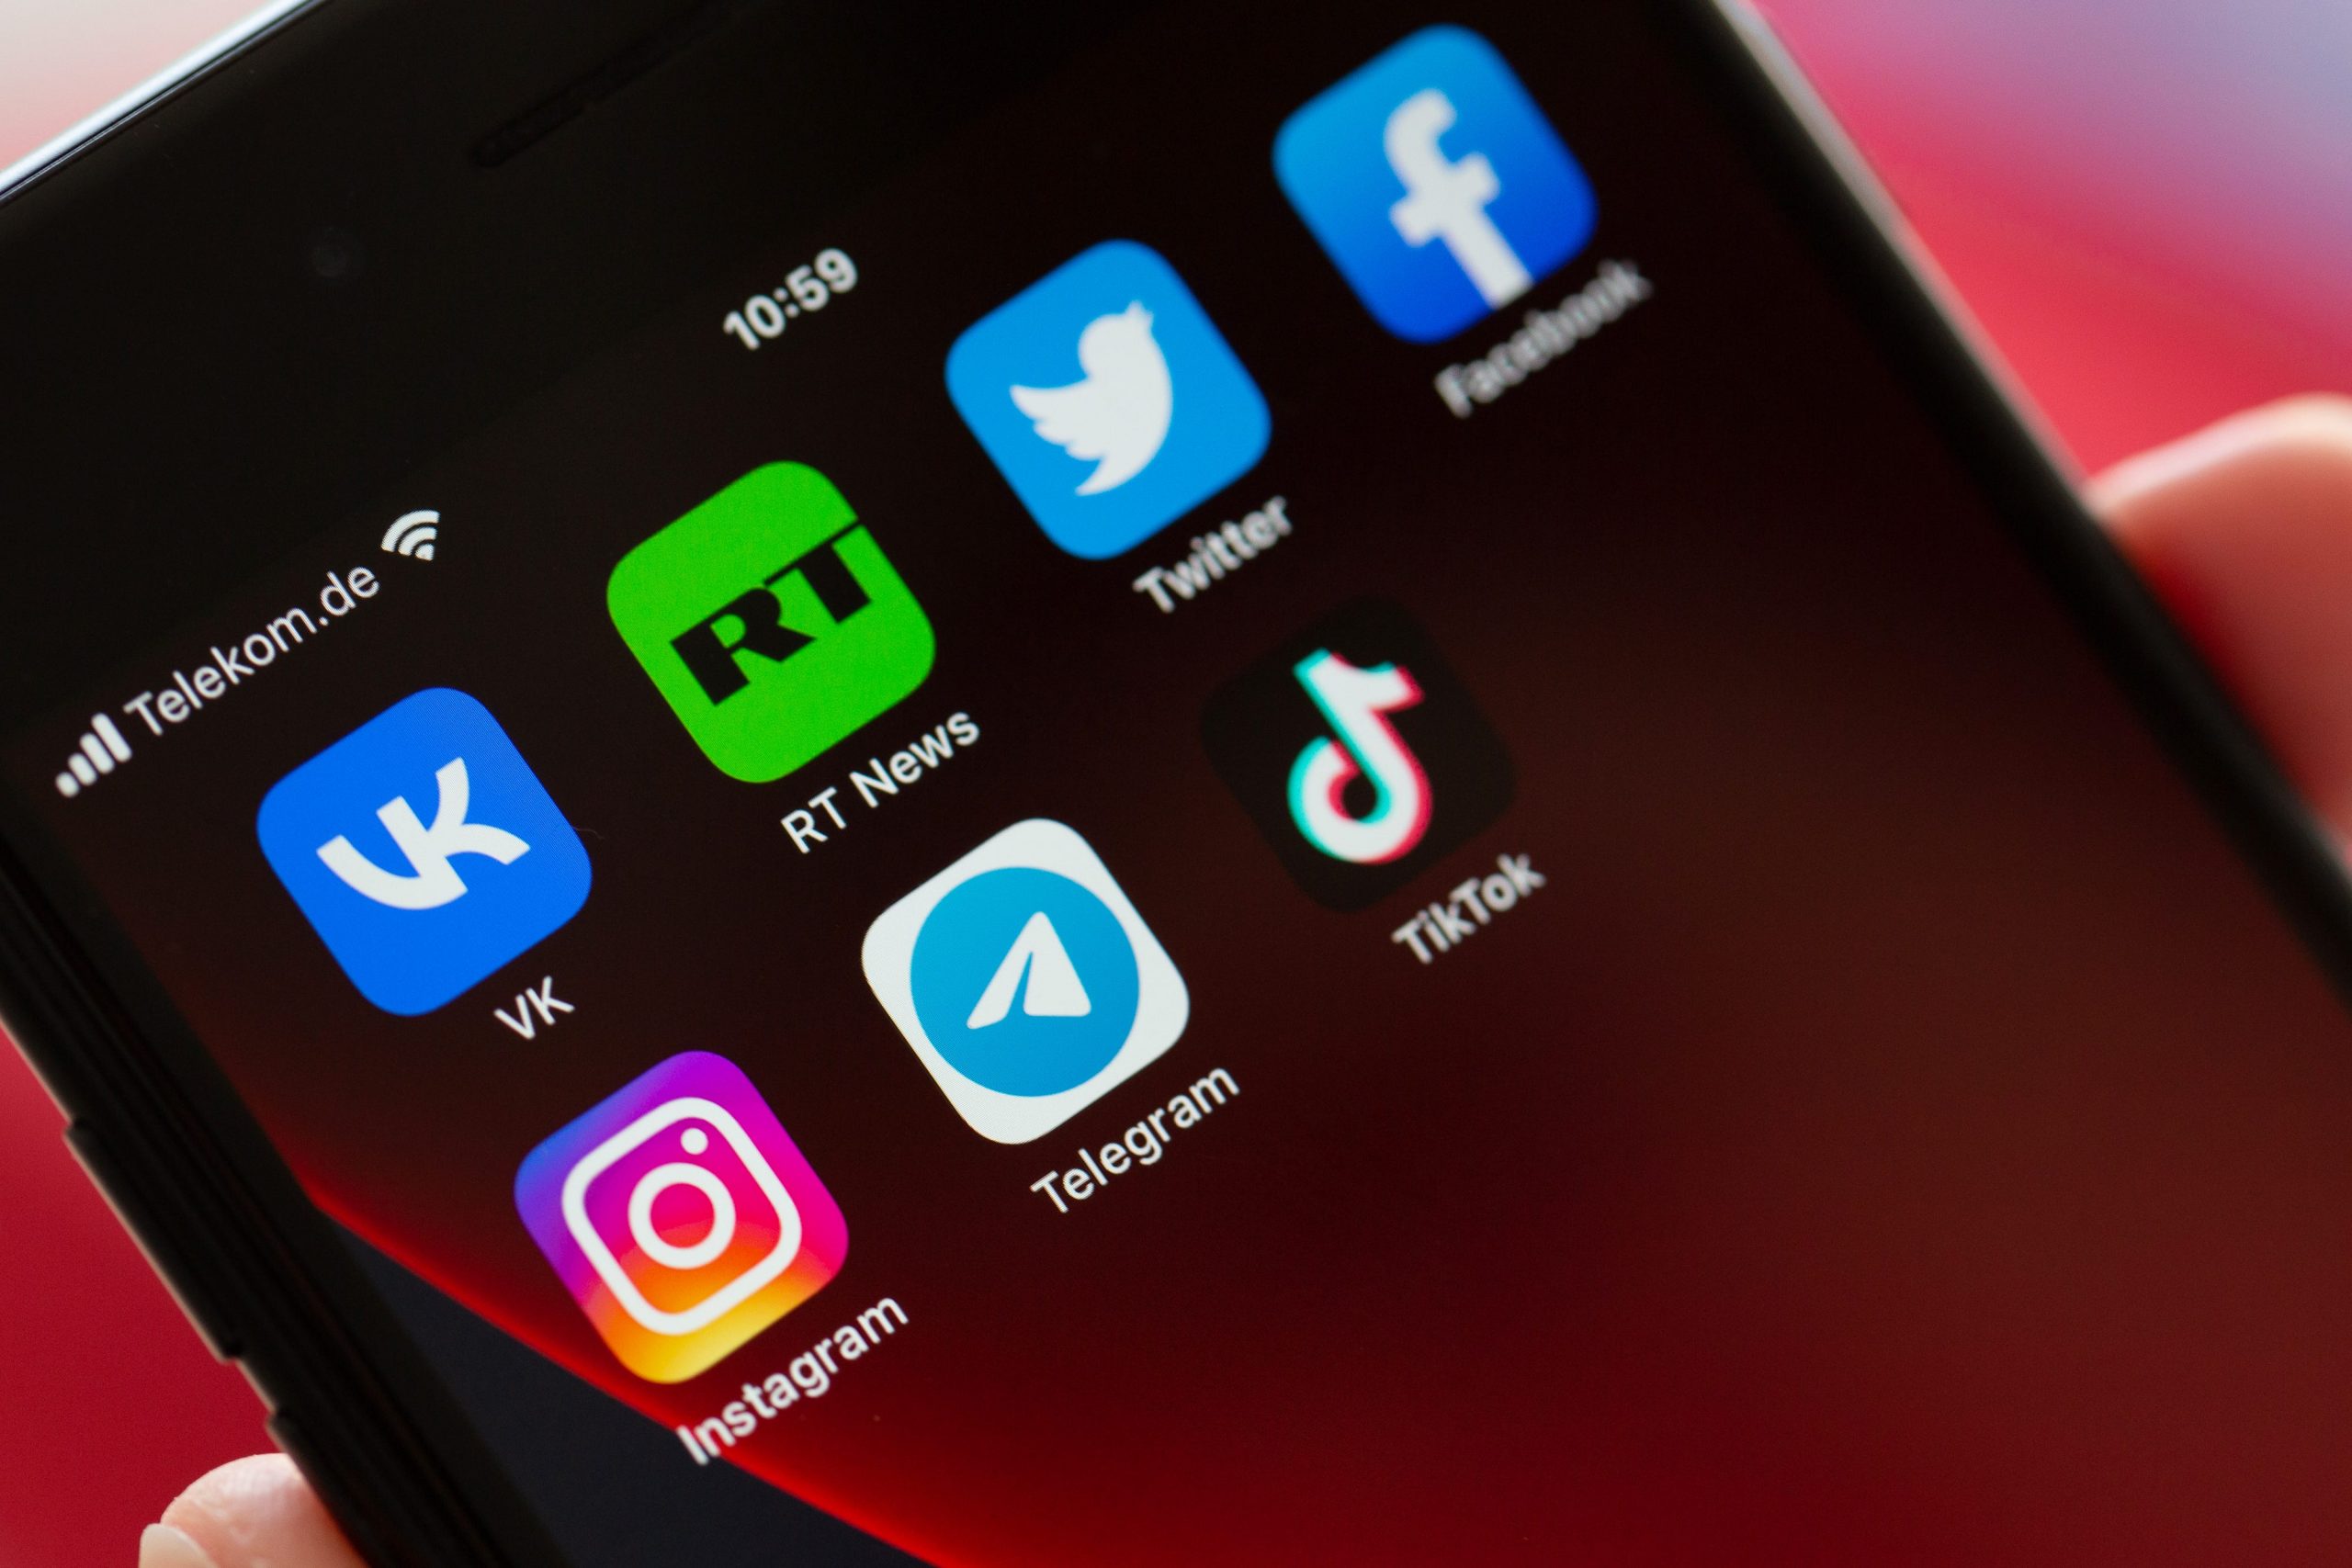 TikTok (rightmost icon in the second row) has said that it would ban Russia-backed news outlets such as RT (icon in the first row, second from left) from its platform in the EU. In this picture, the screen of a smartphone shows the logos of the apps VKontakte, Twitter, RT News, Facebook, Instagram, Telegram and TikTok